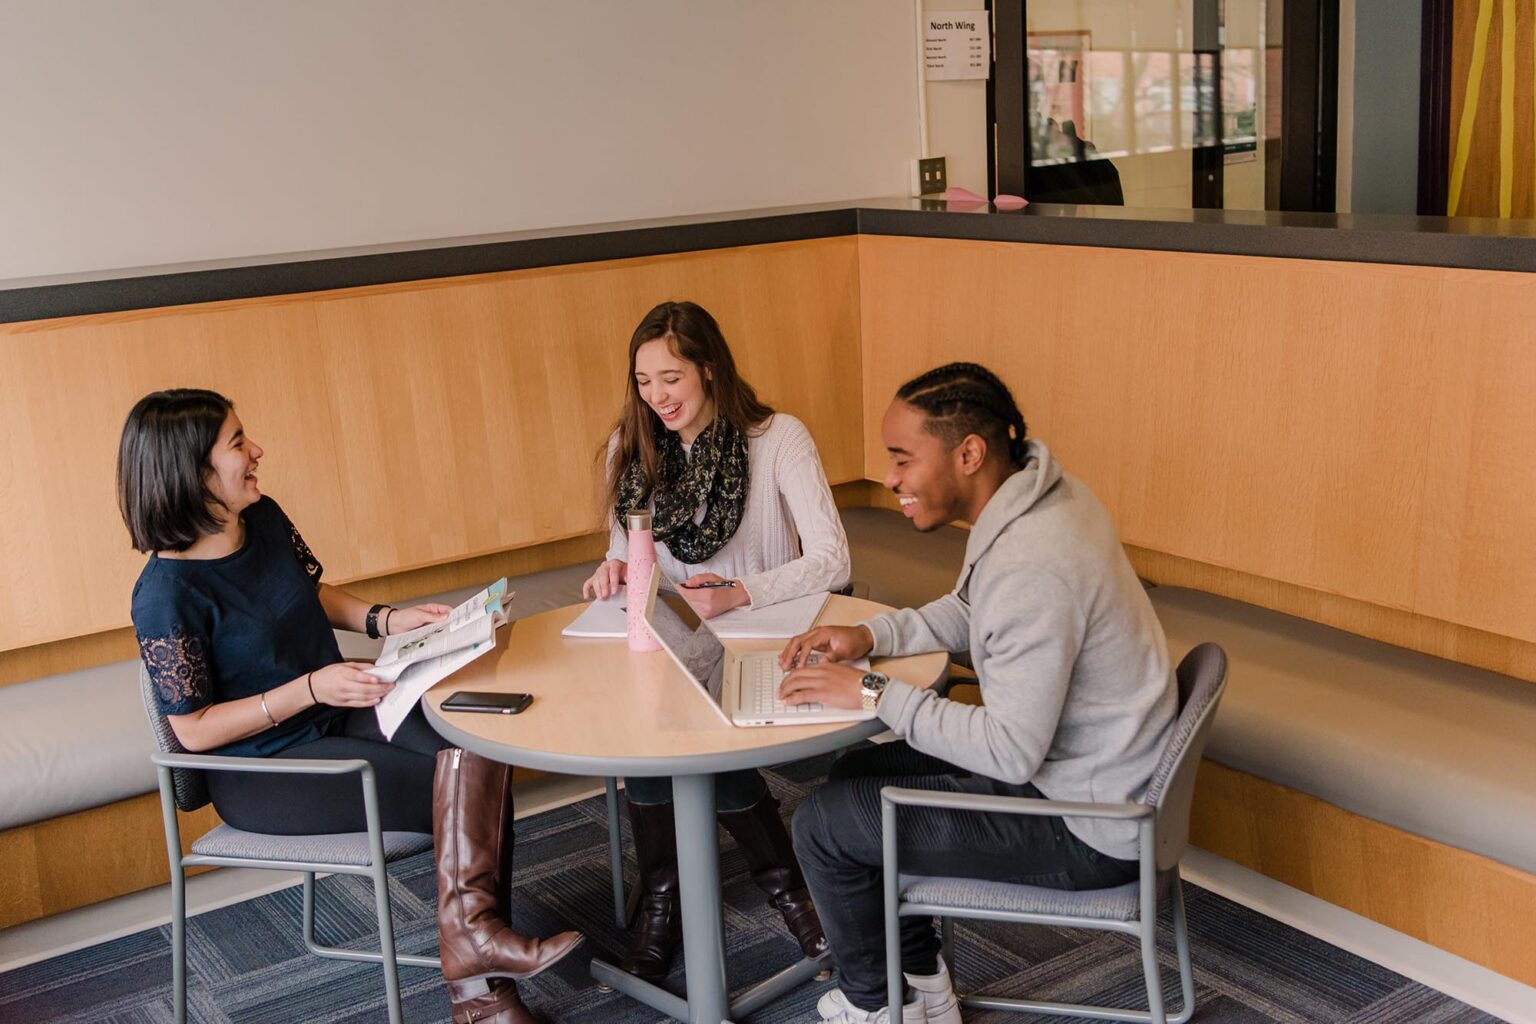 New Amazon-UMBC partnership makes college more accessible for working students